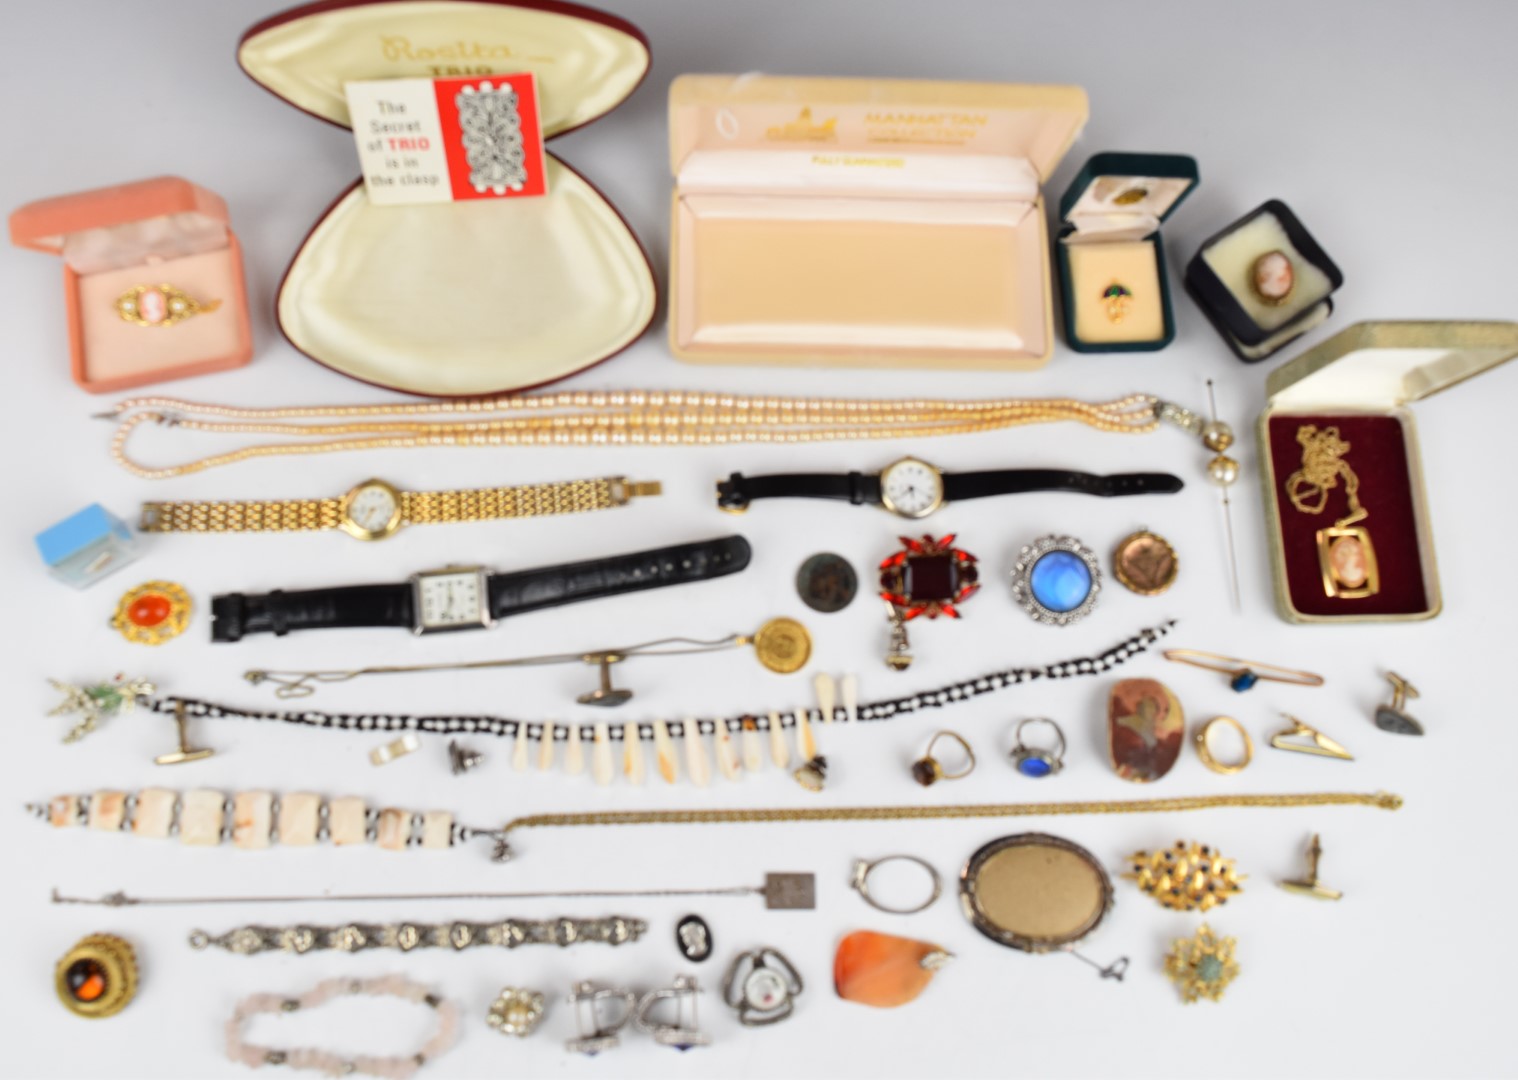 A collection of jewellery including vintage brooches, Exquisite brooches, yellow metal chain, silver